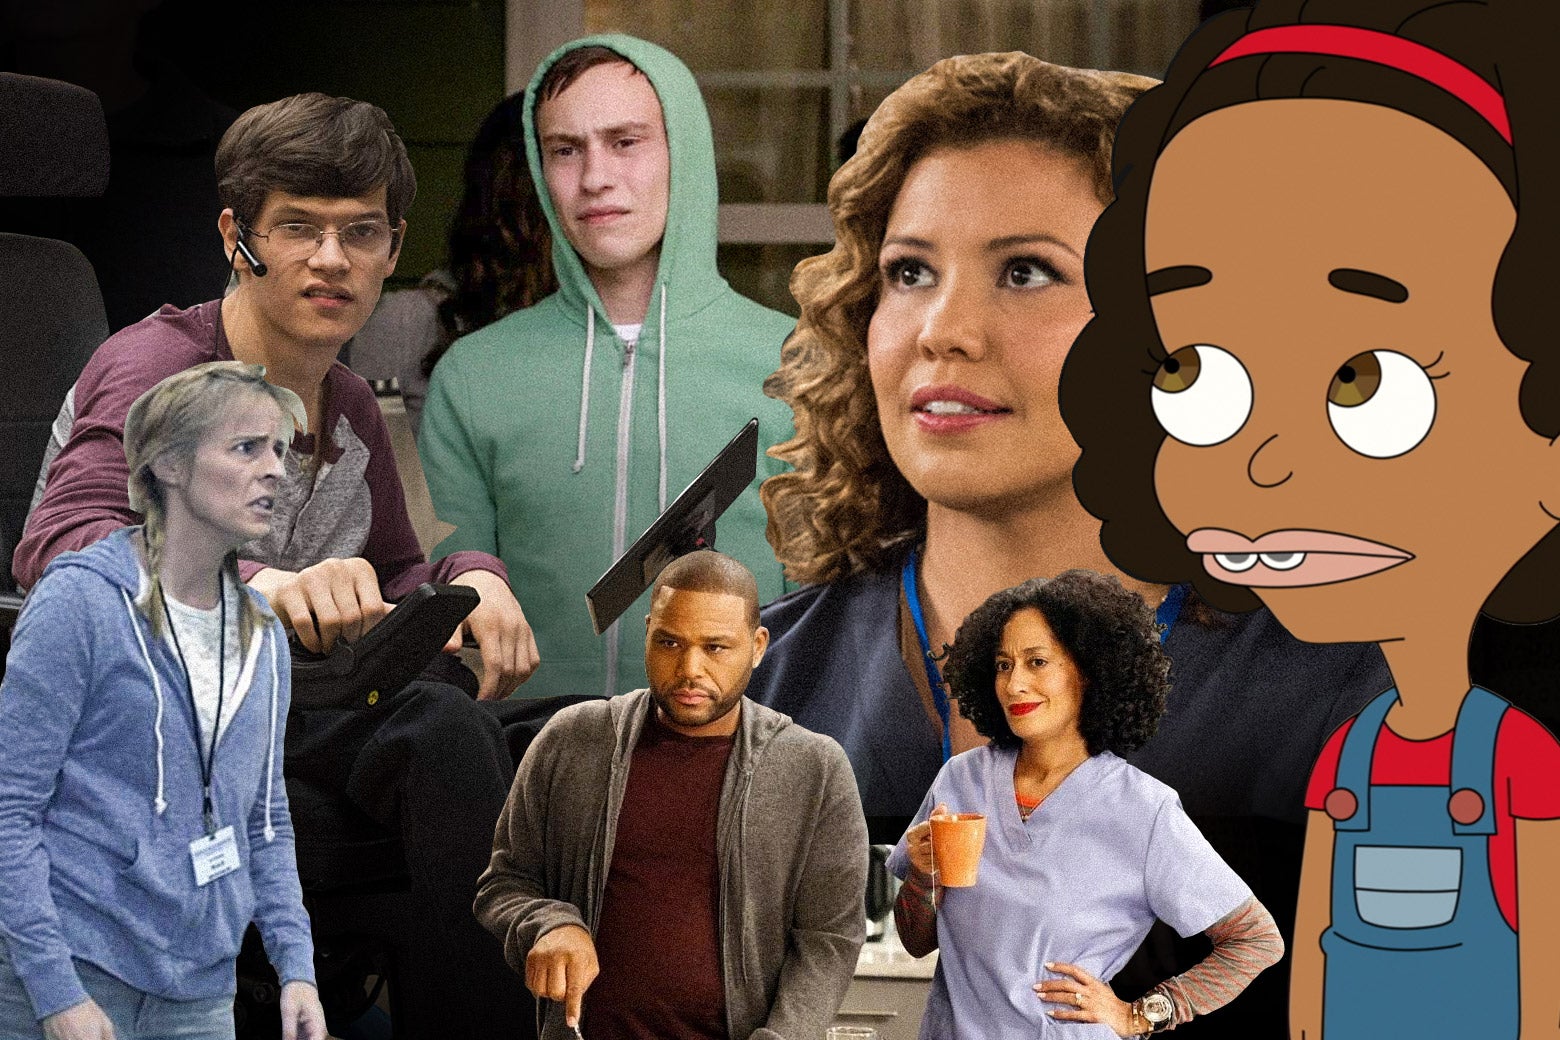 Stills from One Day at a Time, Black-ish, plus some combo of The Bold Type, Big Mouth, Speechless, Atypical, and Lady Dynamite.